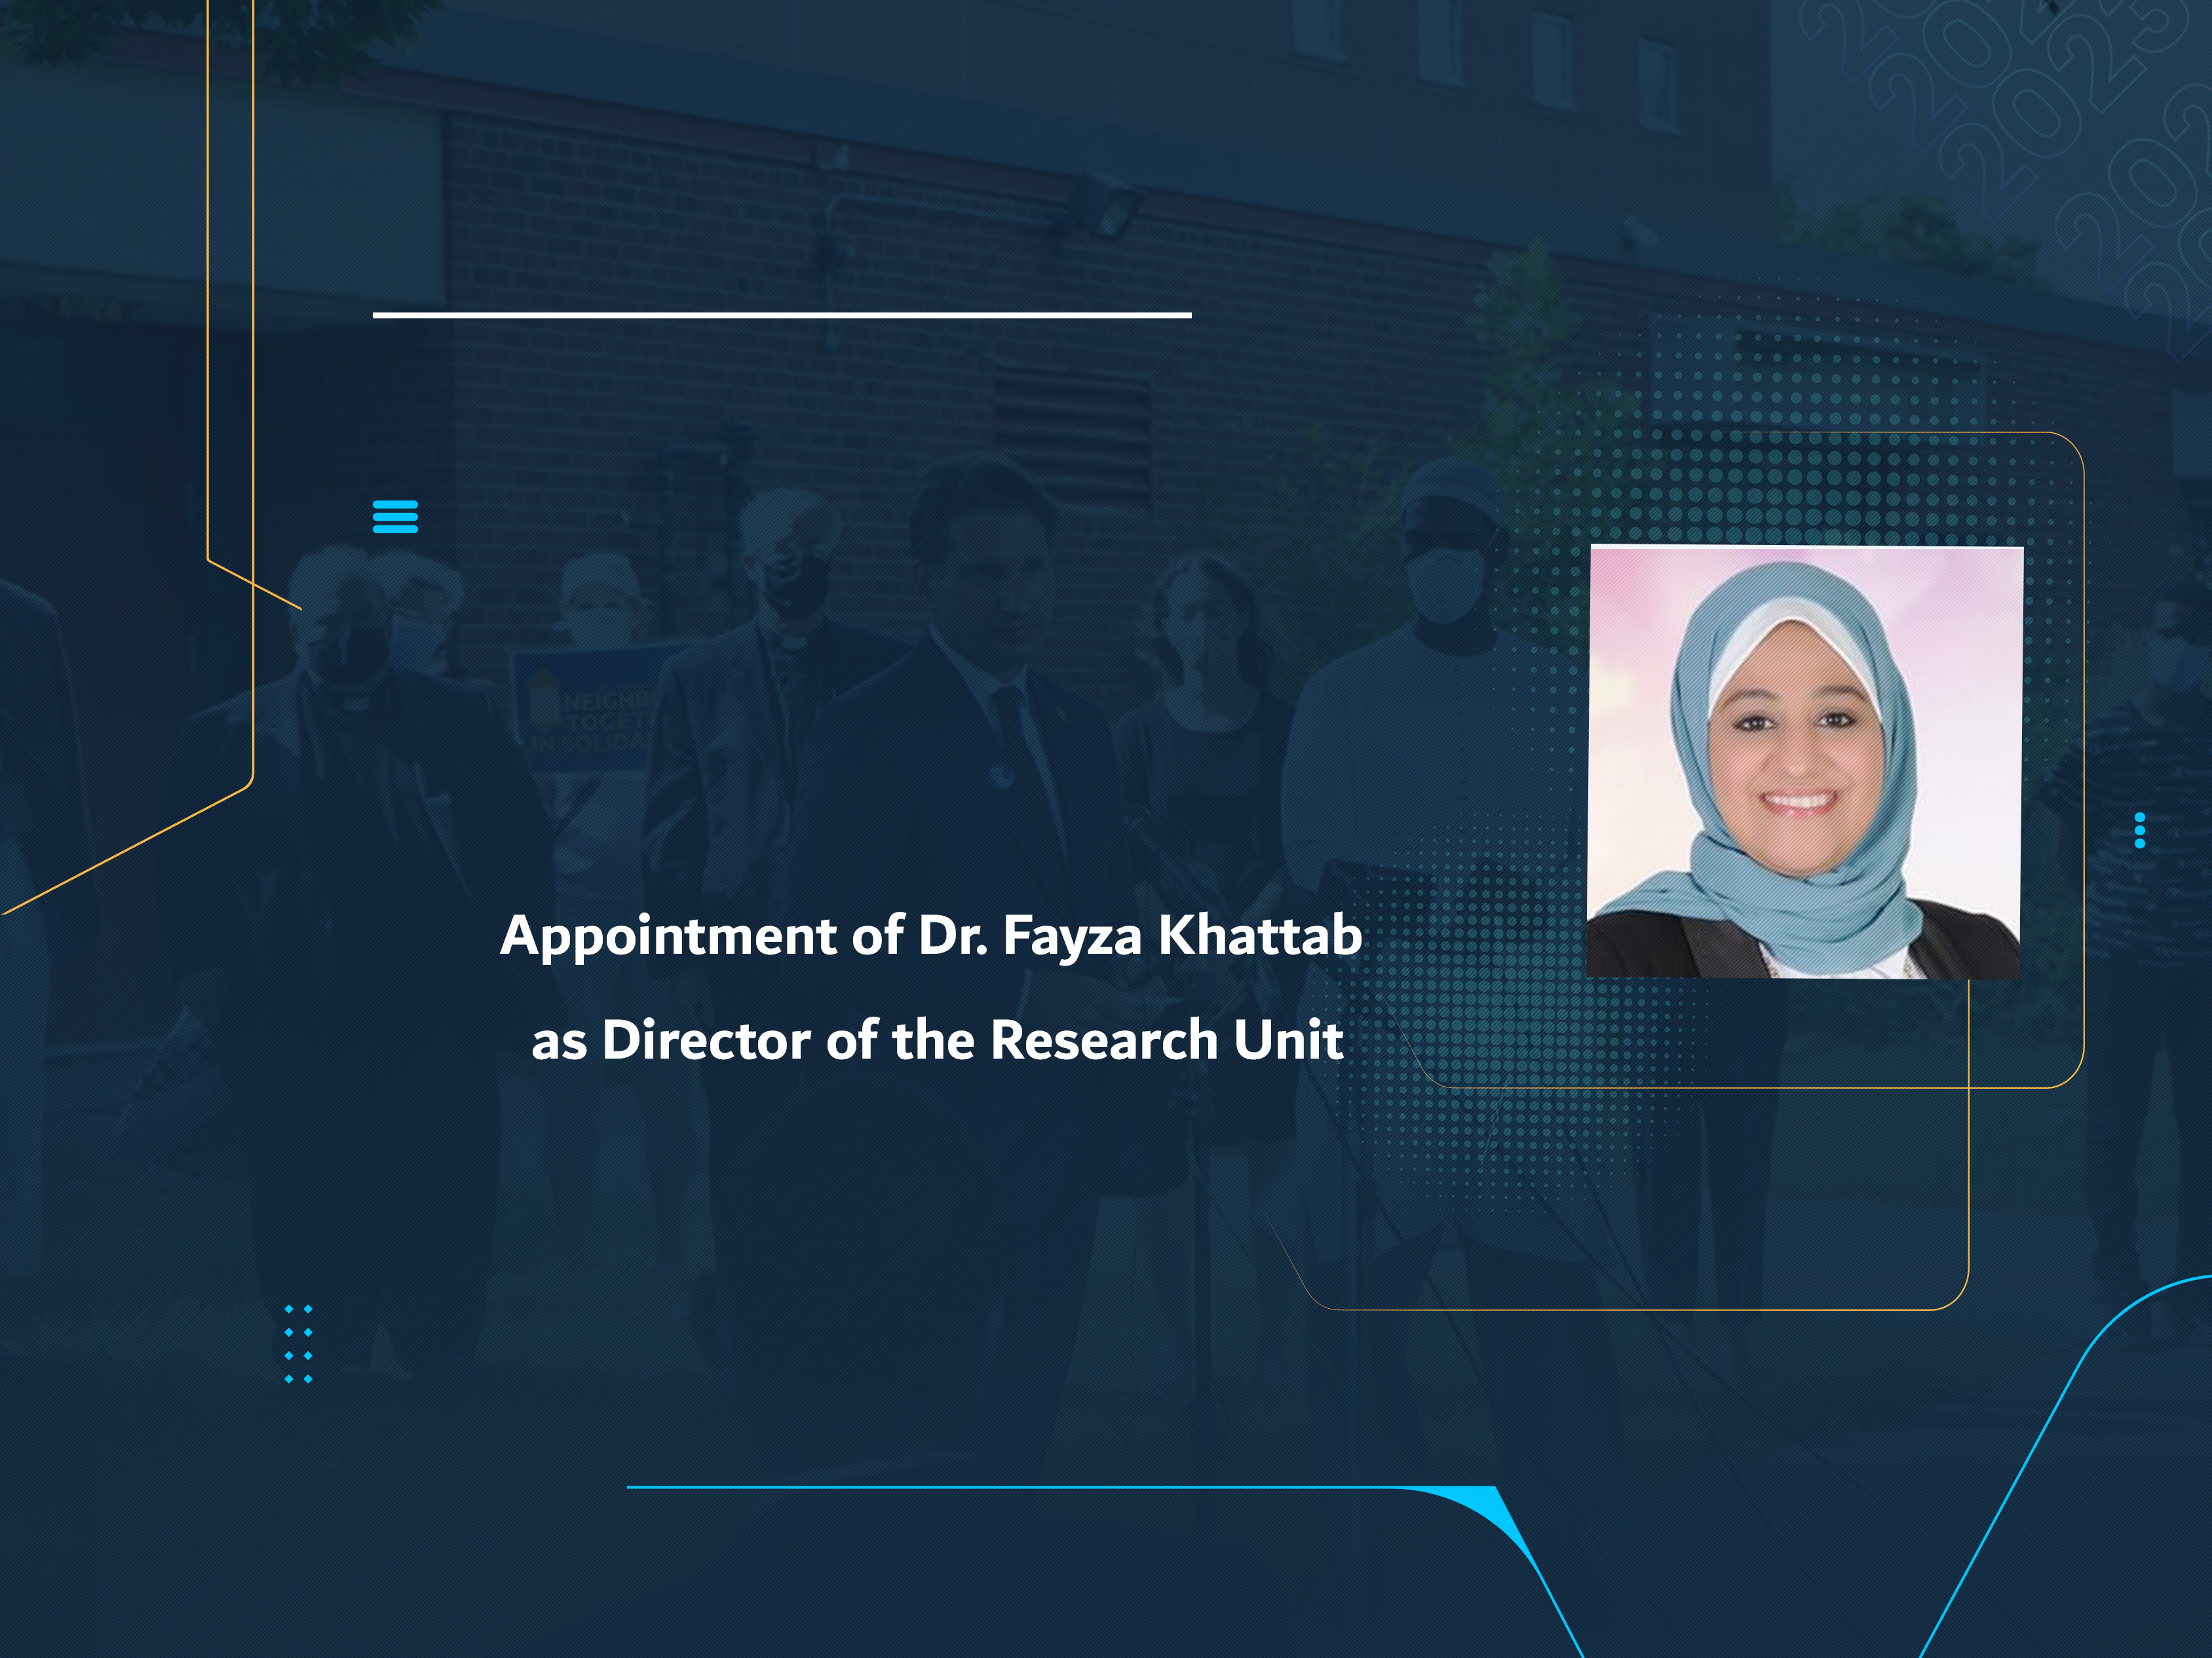 Appointment of Dr. Fayza Khattab as Director of the Research Unit